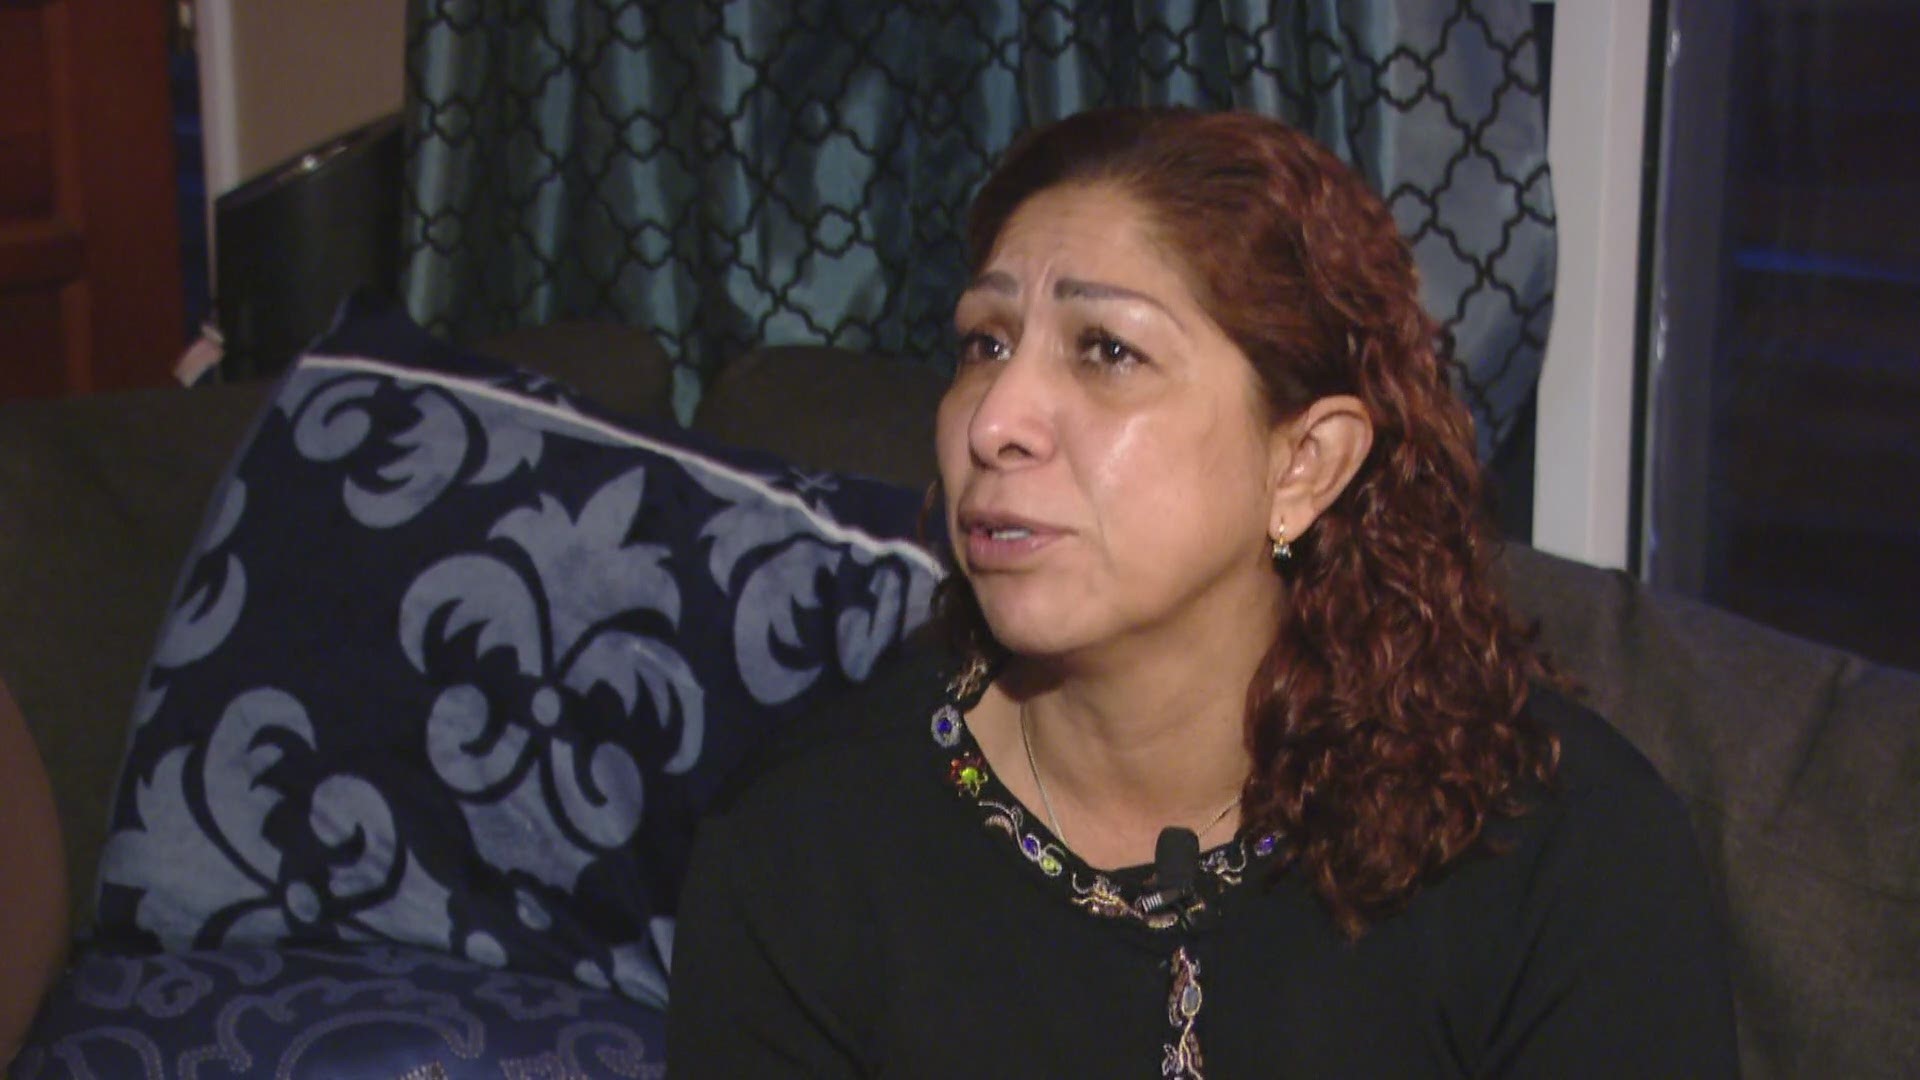 Rocio was told by immigration officers authorities she will be deported after the holidays, on January 2.